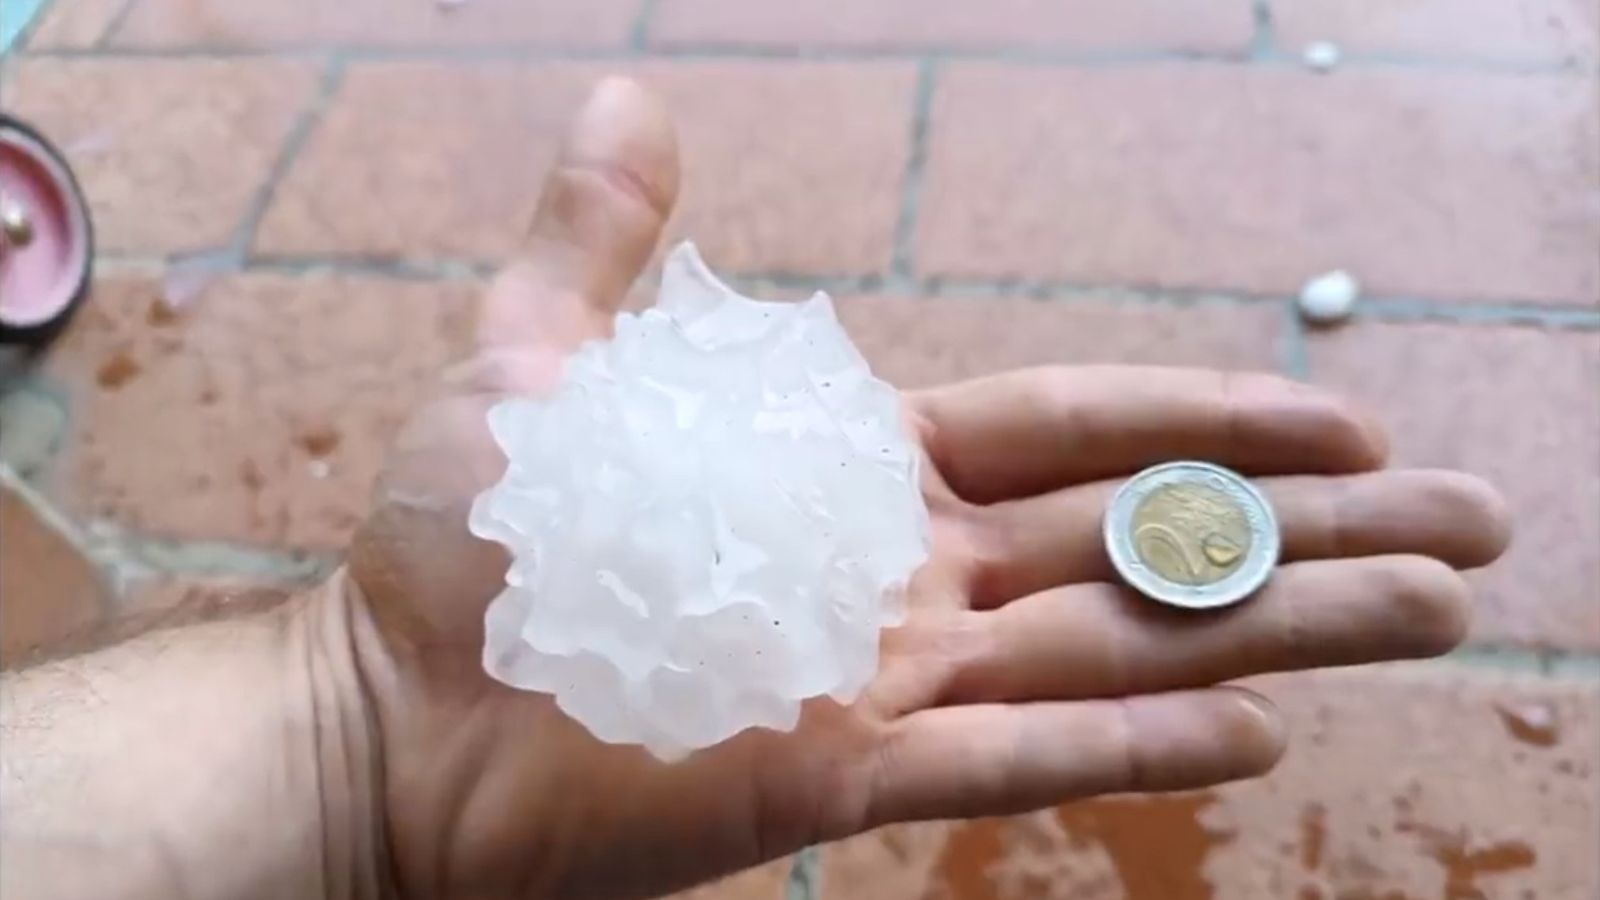 Dramatic hailstorm pummels Italy days after searing heatwave World